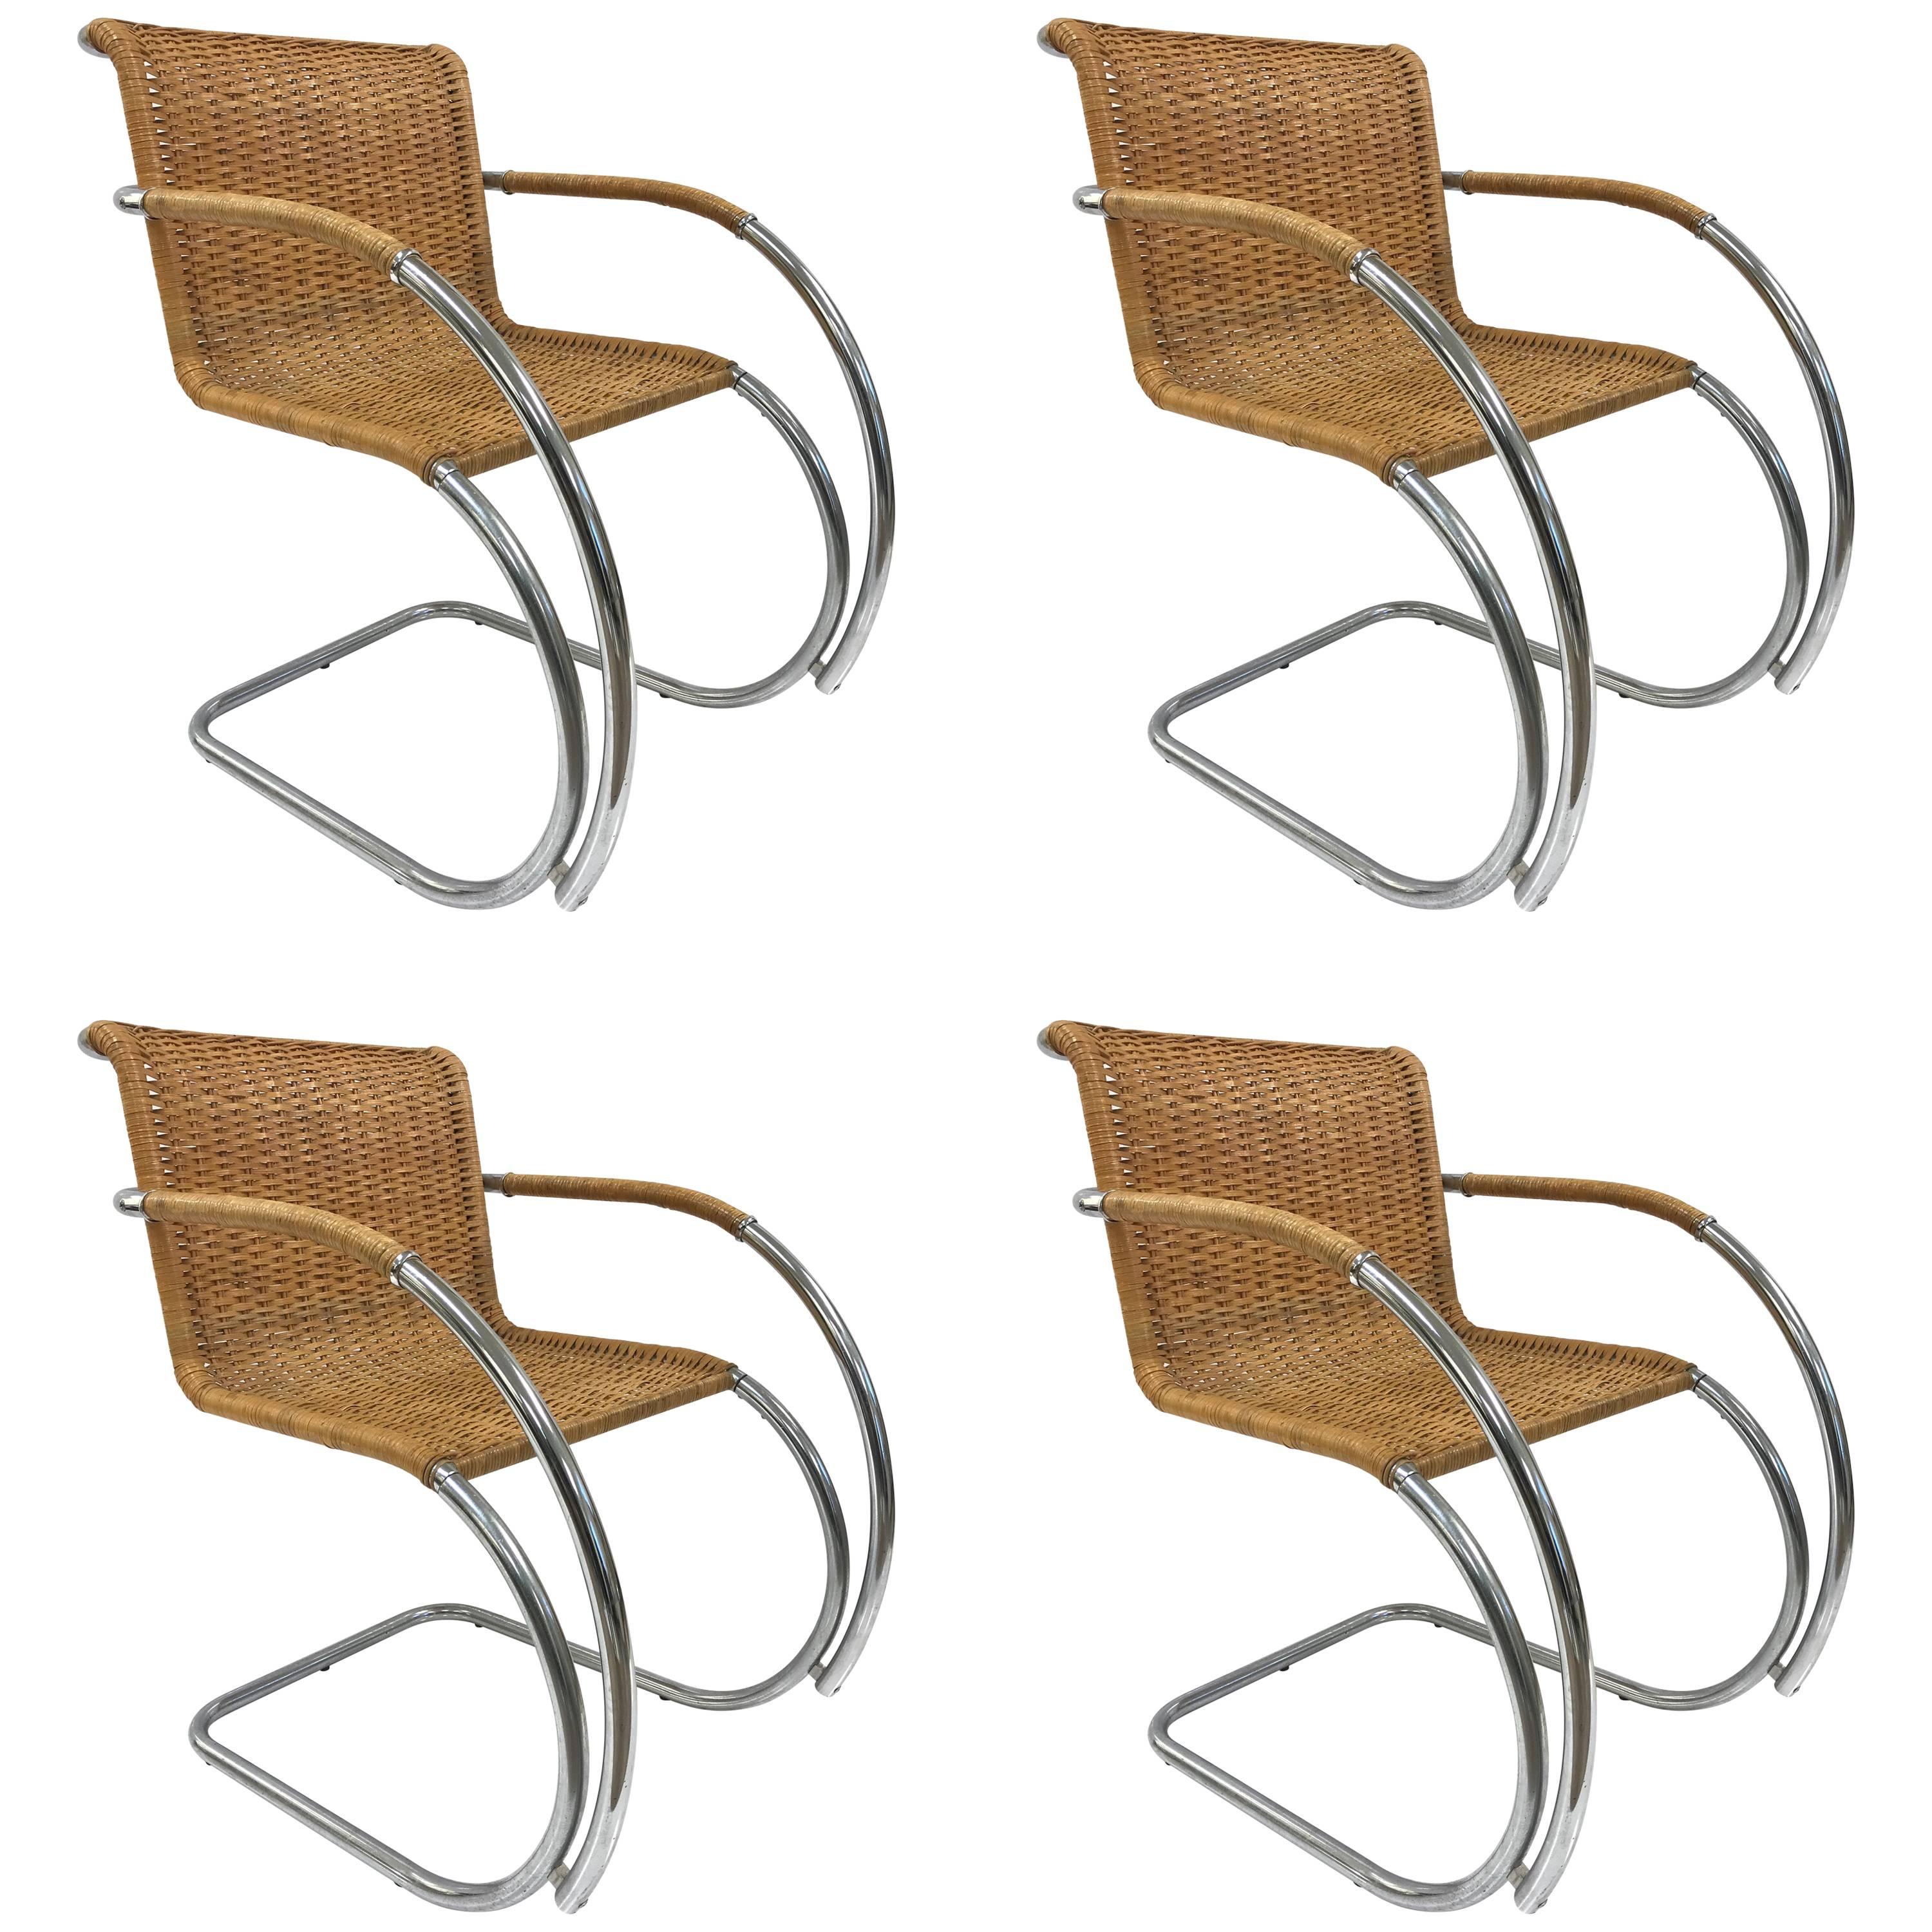 Set of Four Ludwig Mies van der Rohe MR20 Chairs